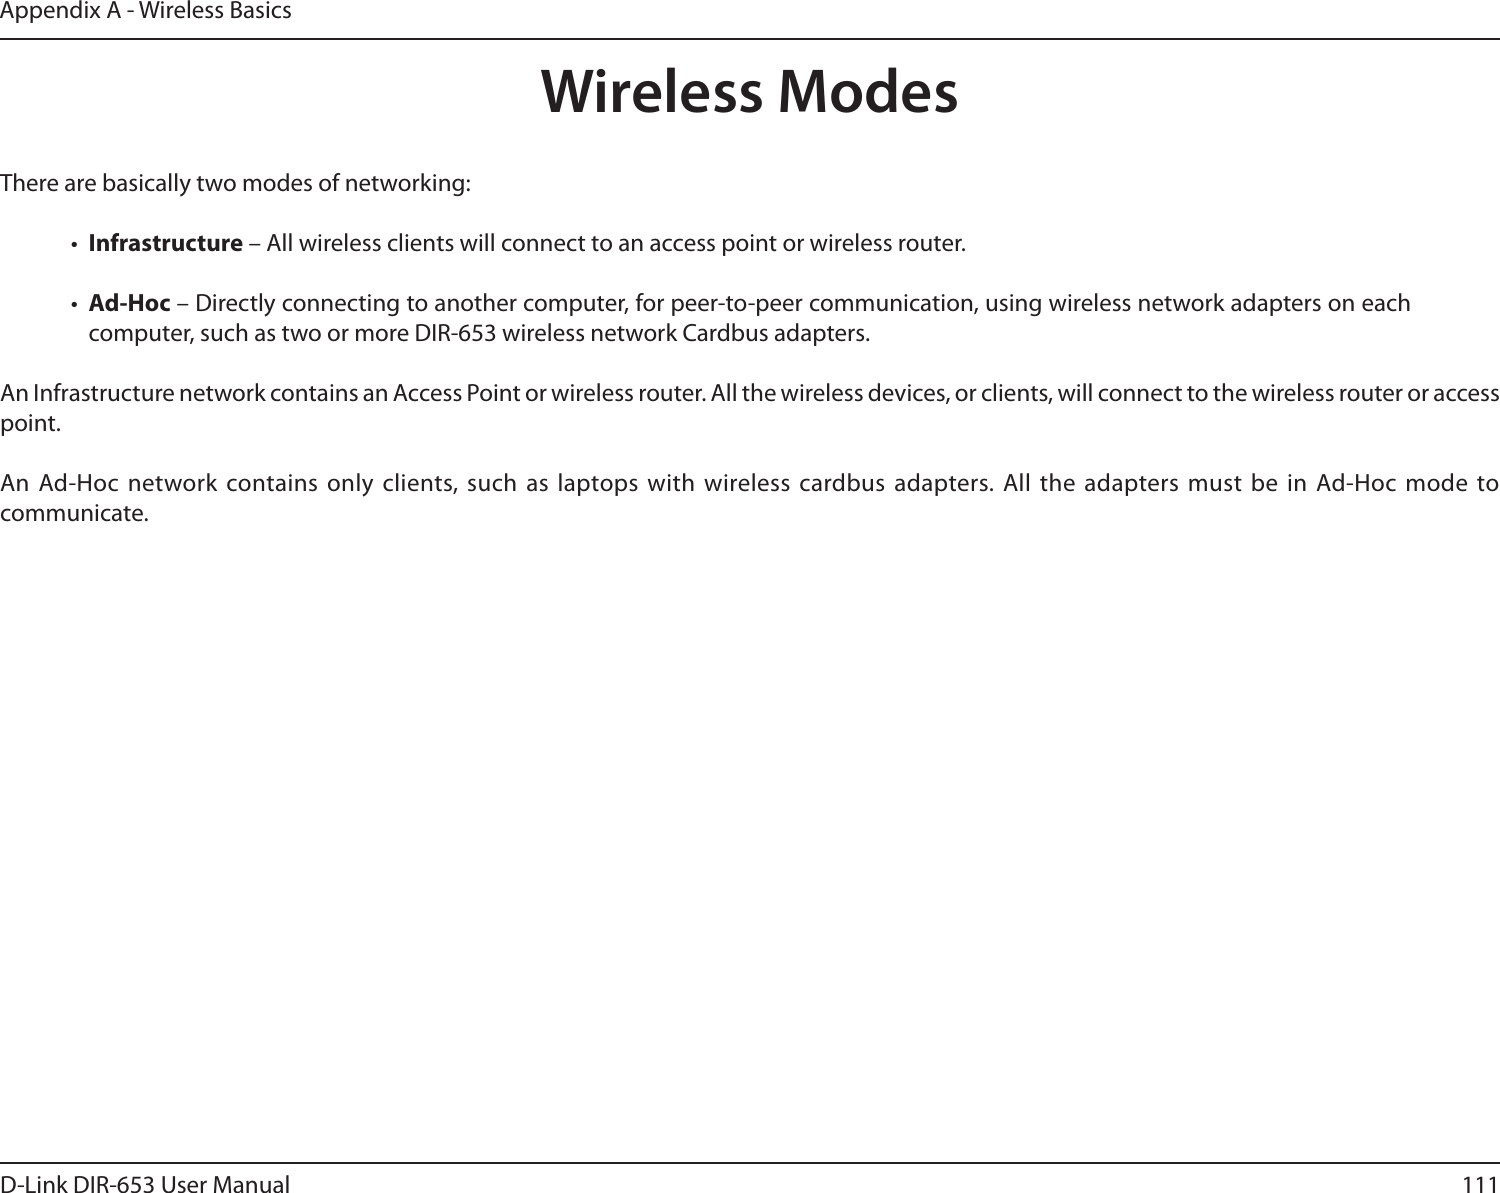 111D-Link DIR-653 User ManualAppendix A - Wireless BasicsThere are basically two modes of networking: •  Infrastructure – All wireless clients will connect to an access point or wireless router.•  Ad-Hoc – Directly connecting to another computer, for peer-to-peer communication, using wireless network adapters on each computer, such as two or more DIR-653 wireless network Cardbus adapters.An Infrastructure network contains an Access Point or wireless router. All the wireless devices, or clients, will connect to the wireless router or access point. An Ad-Hoc network contains only  clients, such as  laptops with wireless cardbus adapters. All the adapters must  be in Ad-Hoc mode  to communicate.Wireless Modes